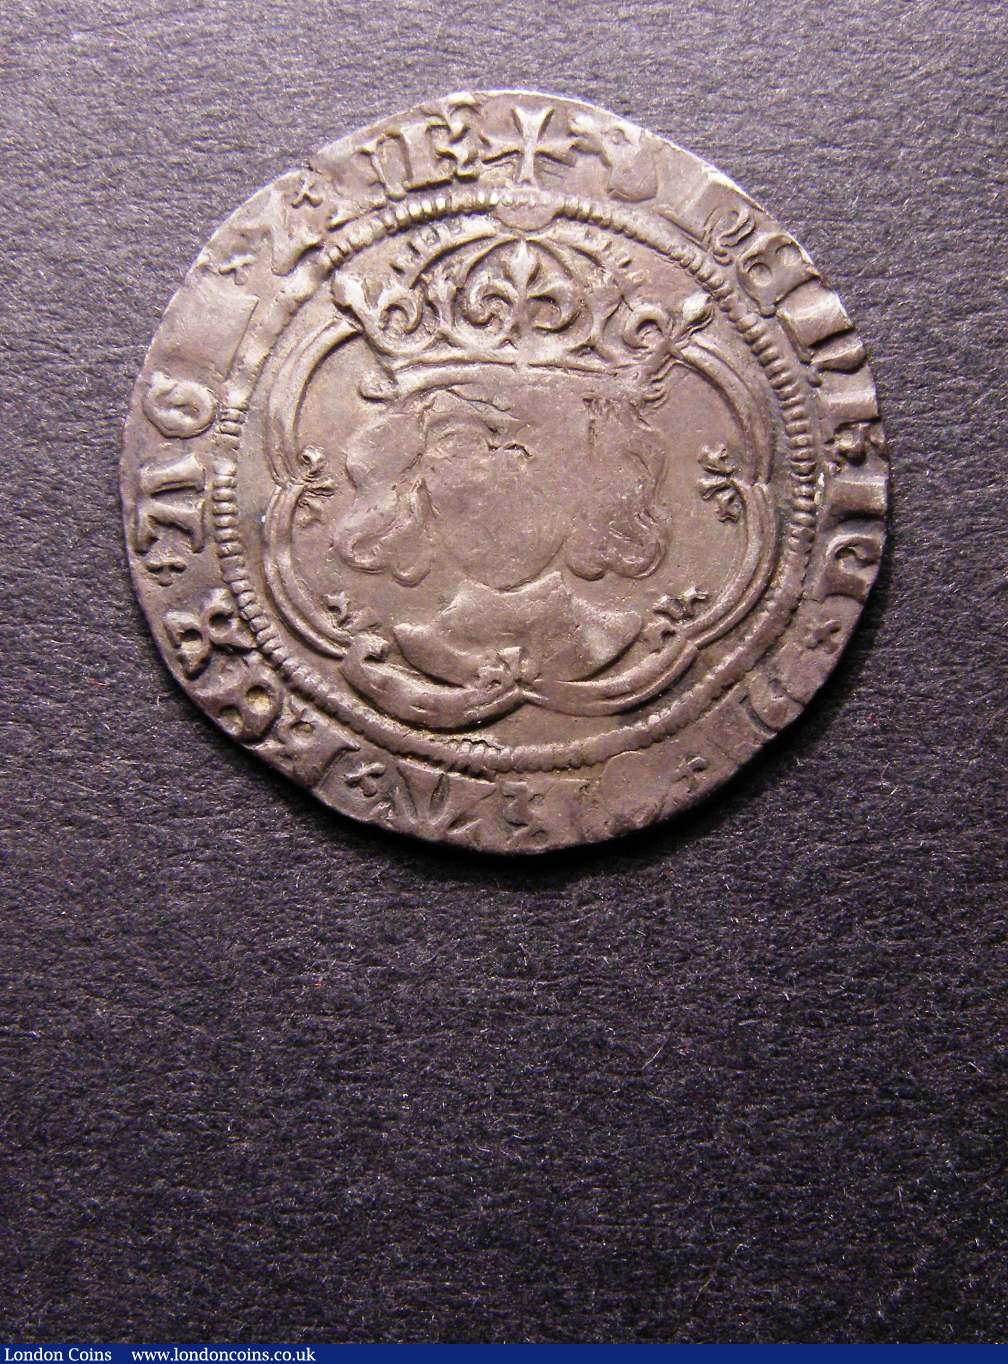 Groat Henry VII Facing Bust issue mintmark Greyhounds Head Type IVa Crown arch is double bar with 4 crockets S.2200 Good Fine weak in some parts : Hammered Coins : Auction 127 : Lot 1201